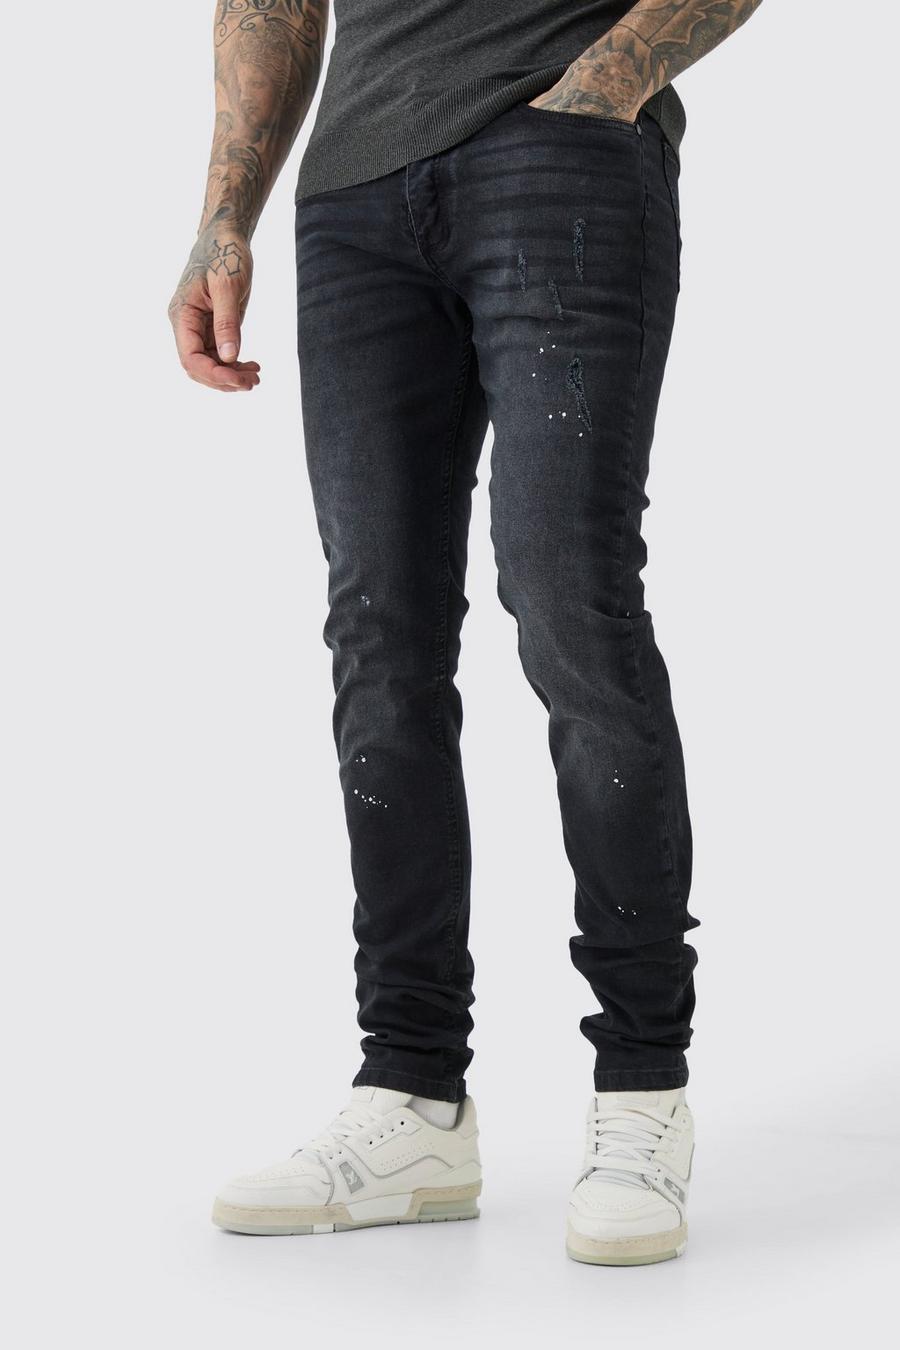 Washed black Tall Skinny Stretch Stacked Tinted Jeans